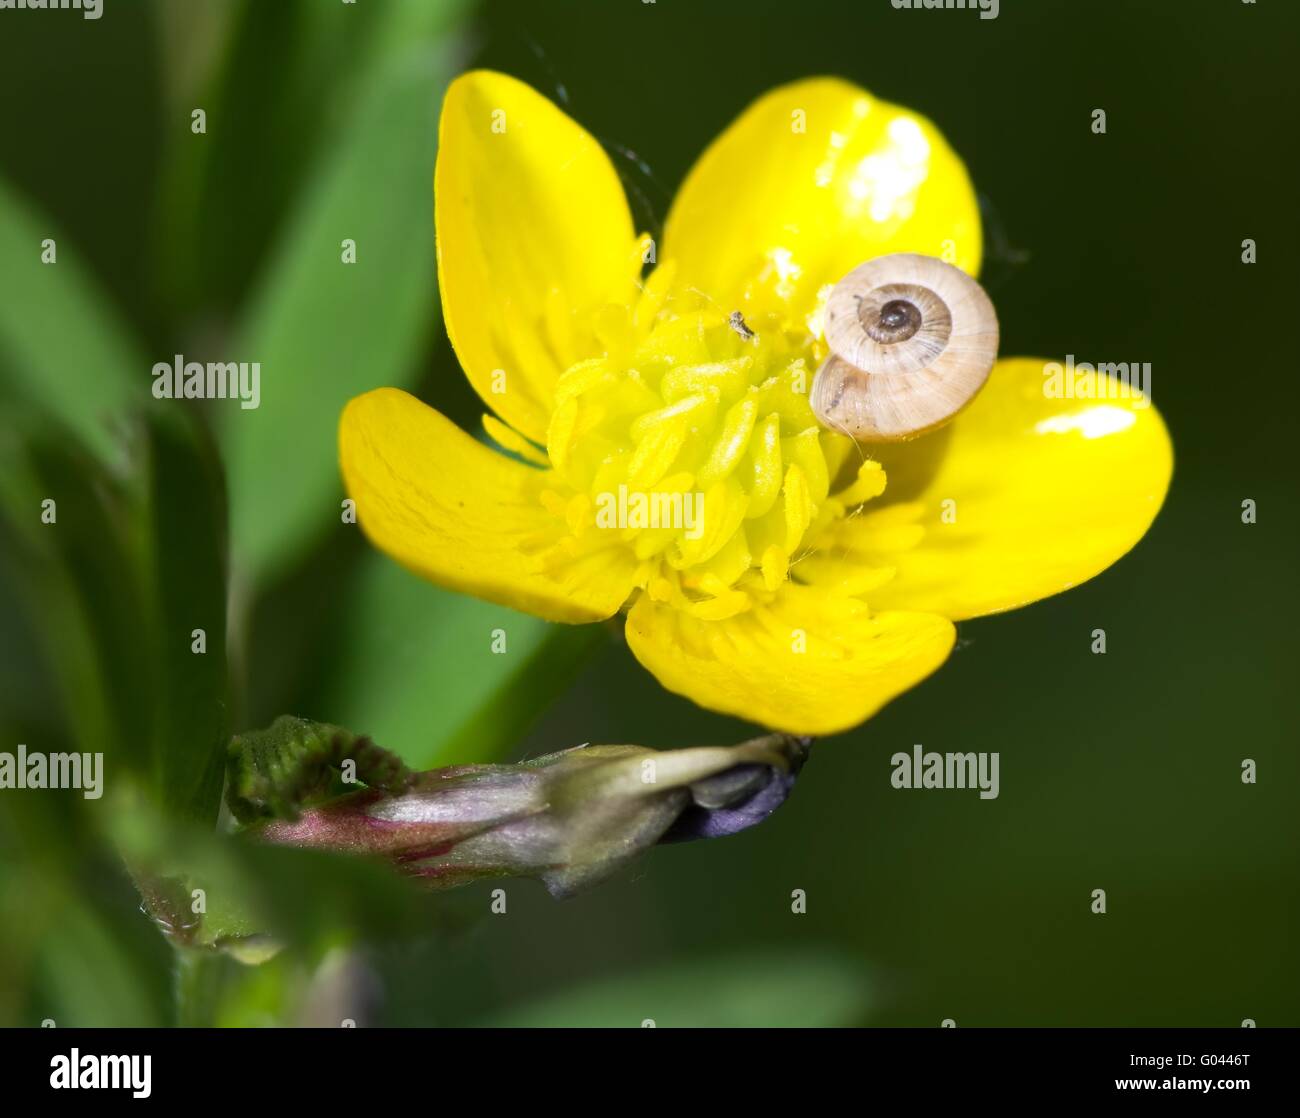 Snail on flower of buttercup an early spring day Stock Photo